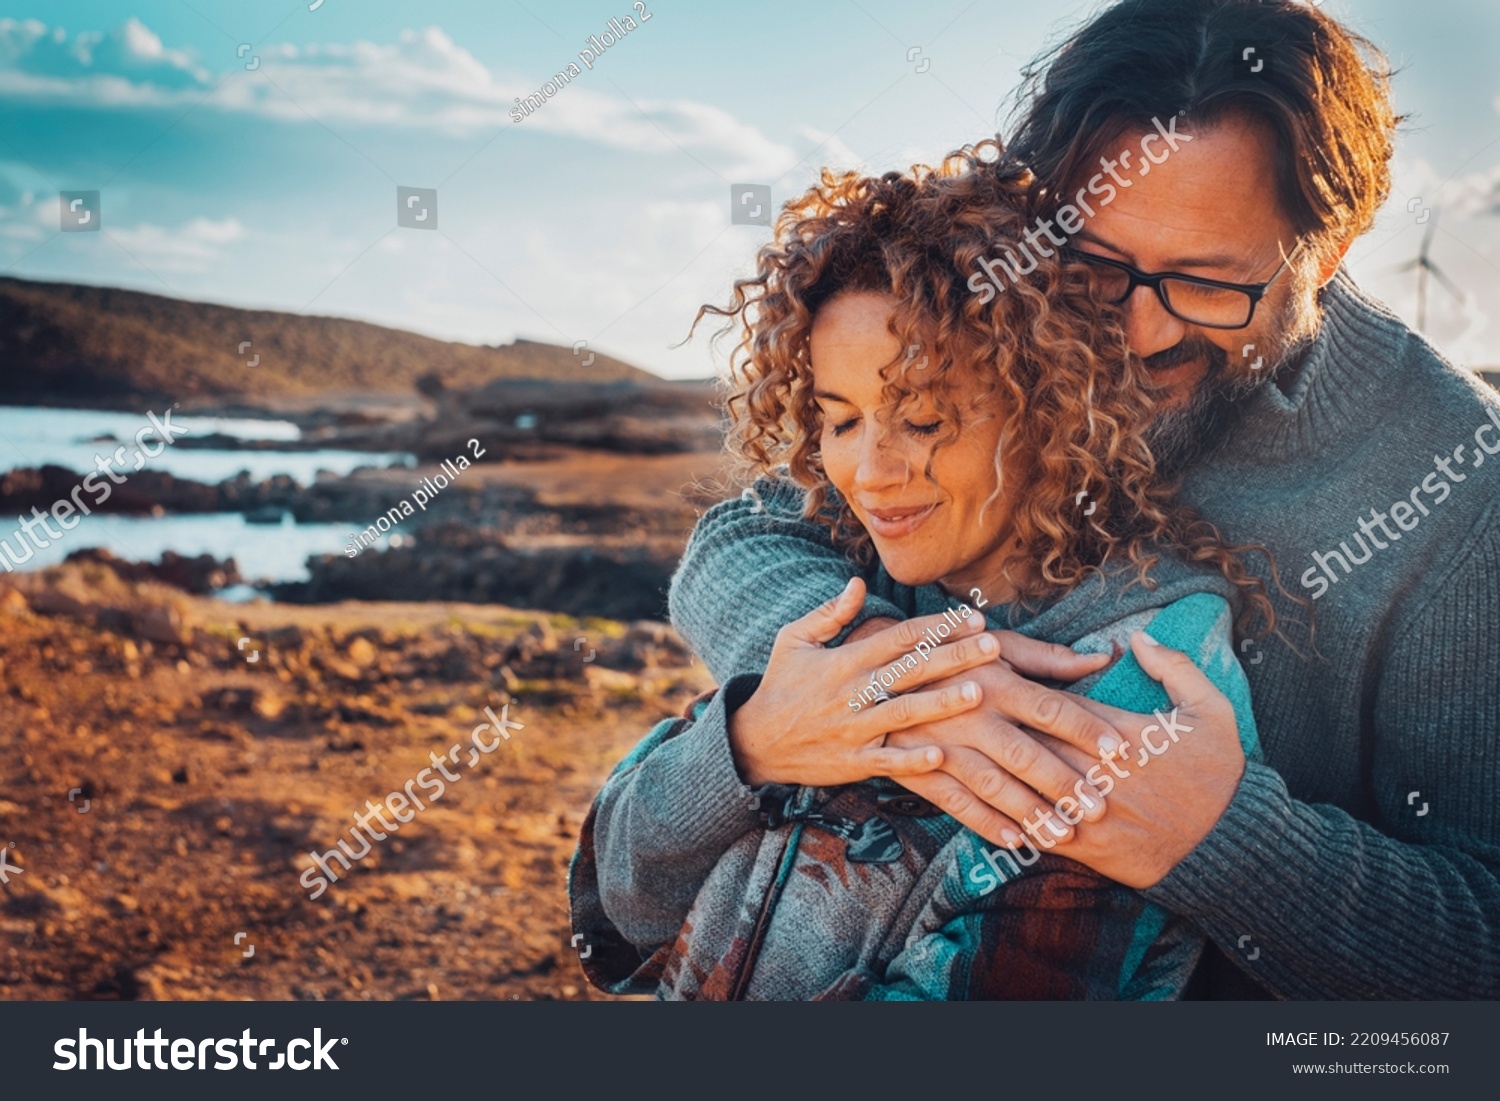 Happy young couple in love hugging outdoors with tenderness and relationship. Concept of travel lifestyle. Man and woman embracing with scenic nature background outdoors. Leisure love people vacation #2209456087